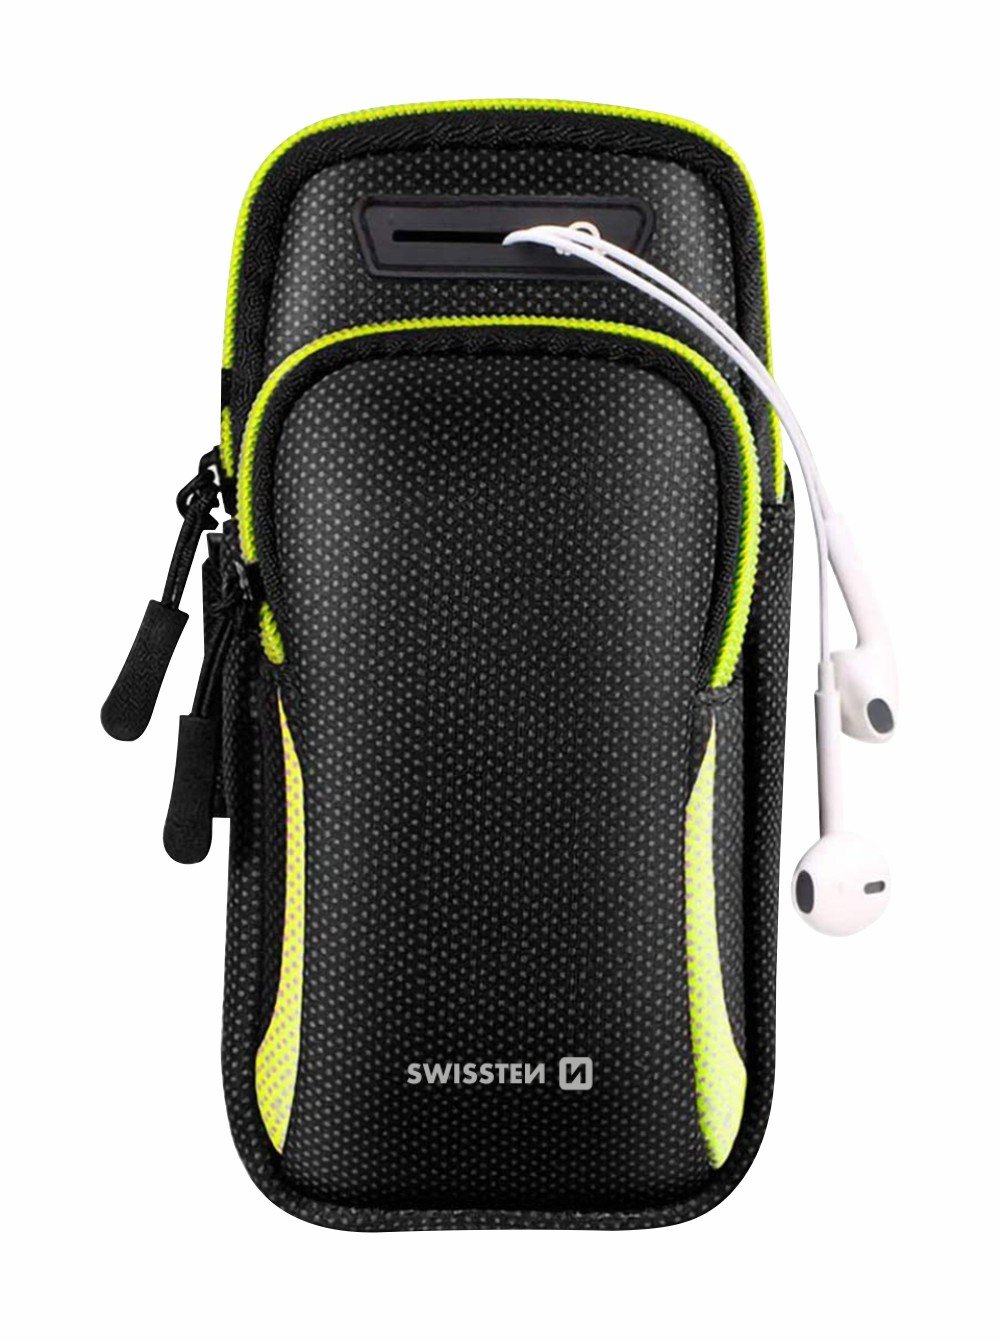 Swissten Armbag Case for phones up to 6.7 inches Black